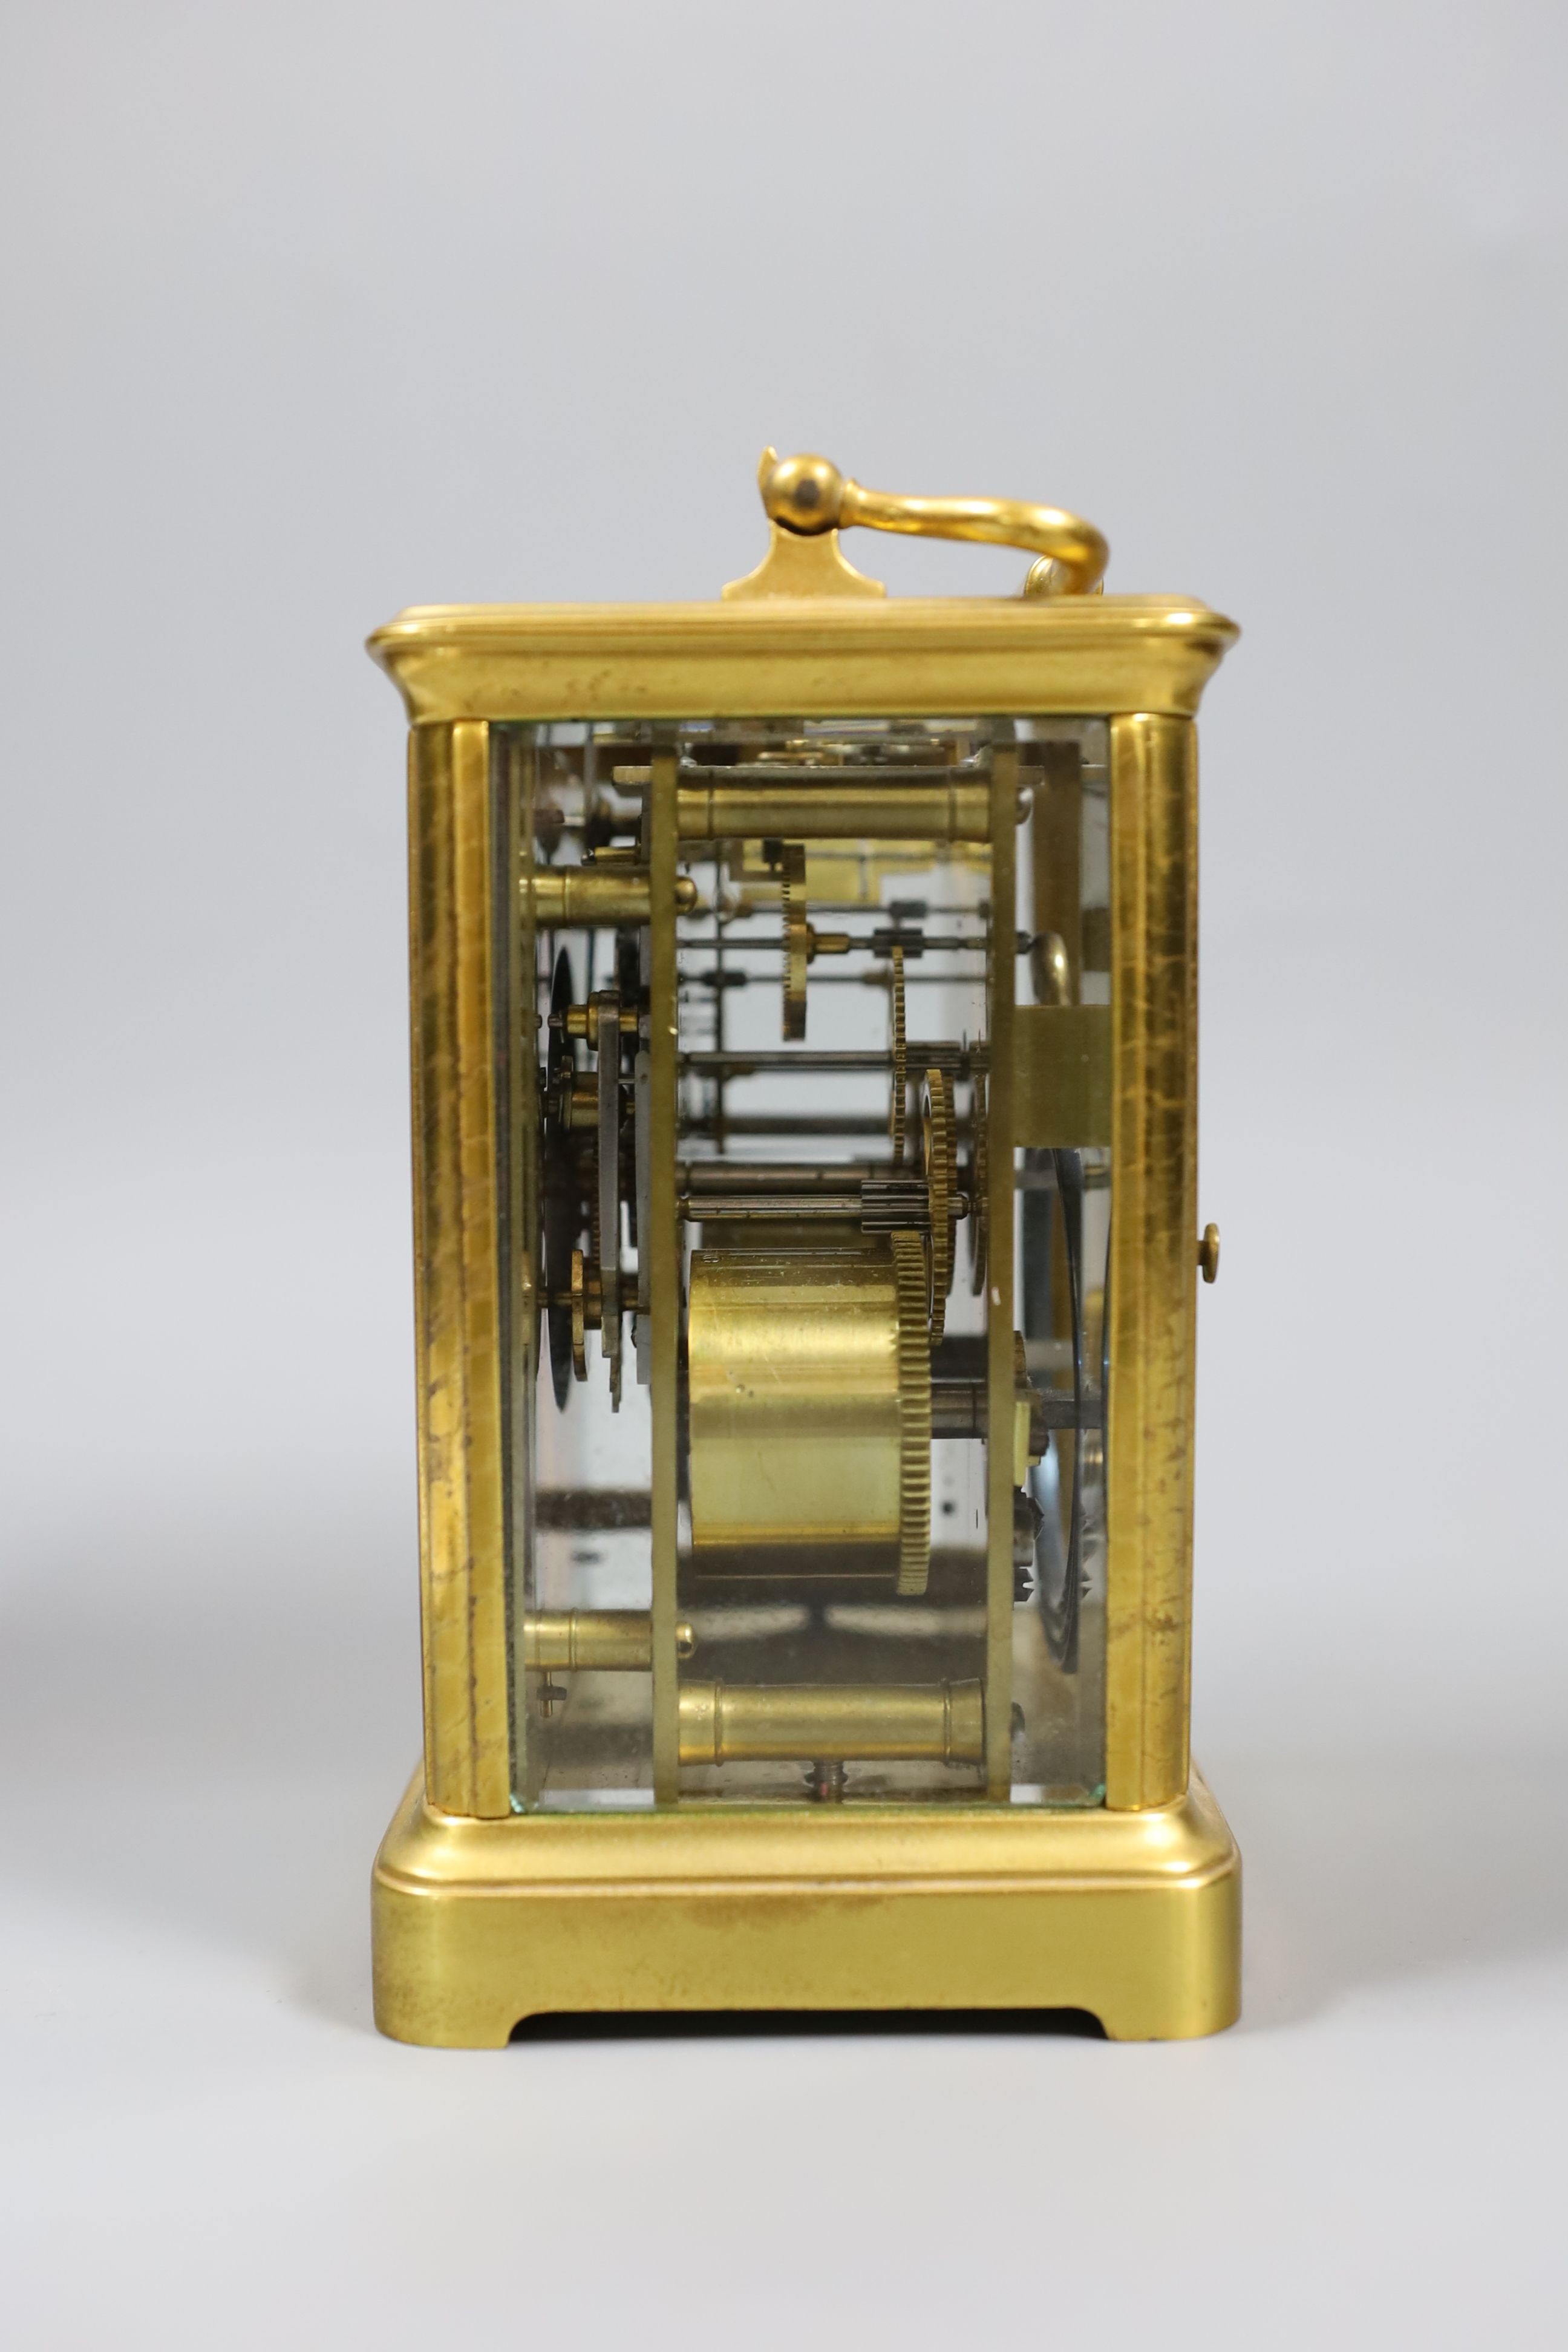 A French gilt brass repeating carriage clock, 14.5 cm high